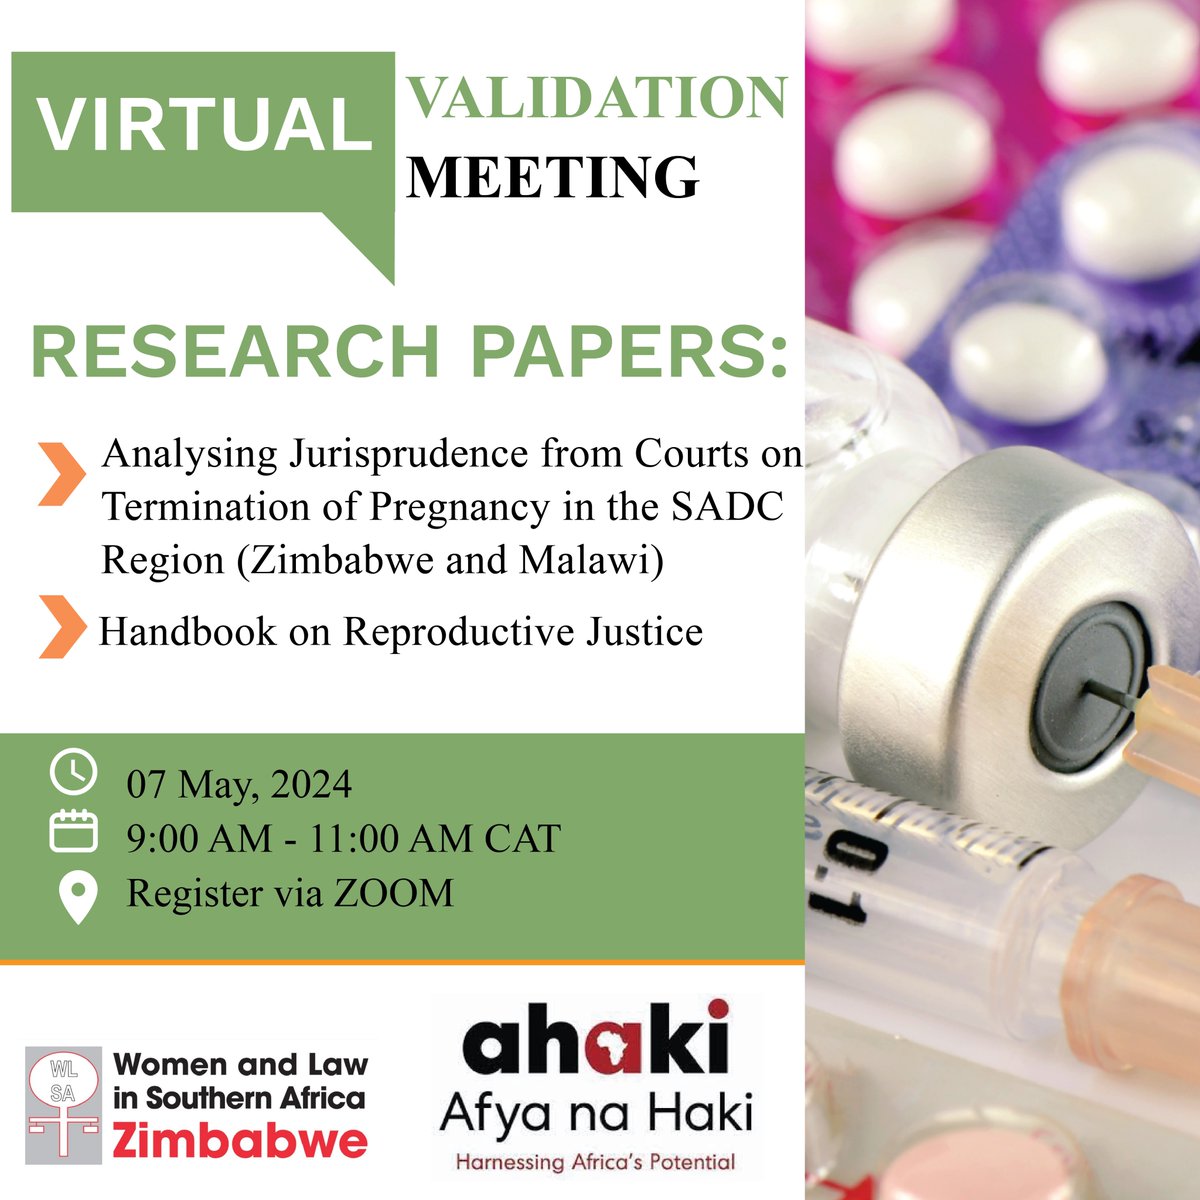 📢𝐒𝐚𝐯𝐞 𝐭𝐡𝐞 𝐃𝐚𝐭𝐞! Join us for an upcoming virtual validation meeting on 📚research papers: Analysing Jurisprudence from Courts on Termination of Pregnancy in Zimbabwe and Malawi and Handbook on Reproductive Justice. 🗓️ Date: May 7, 2024 🕘 Time: 9:00 AM - 11:00 AM CAT